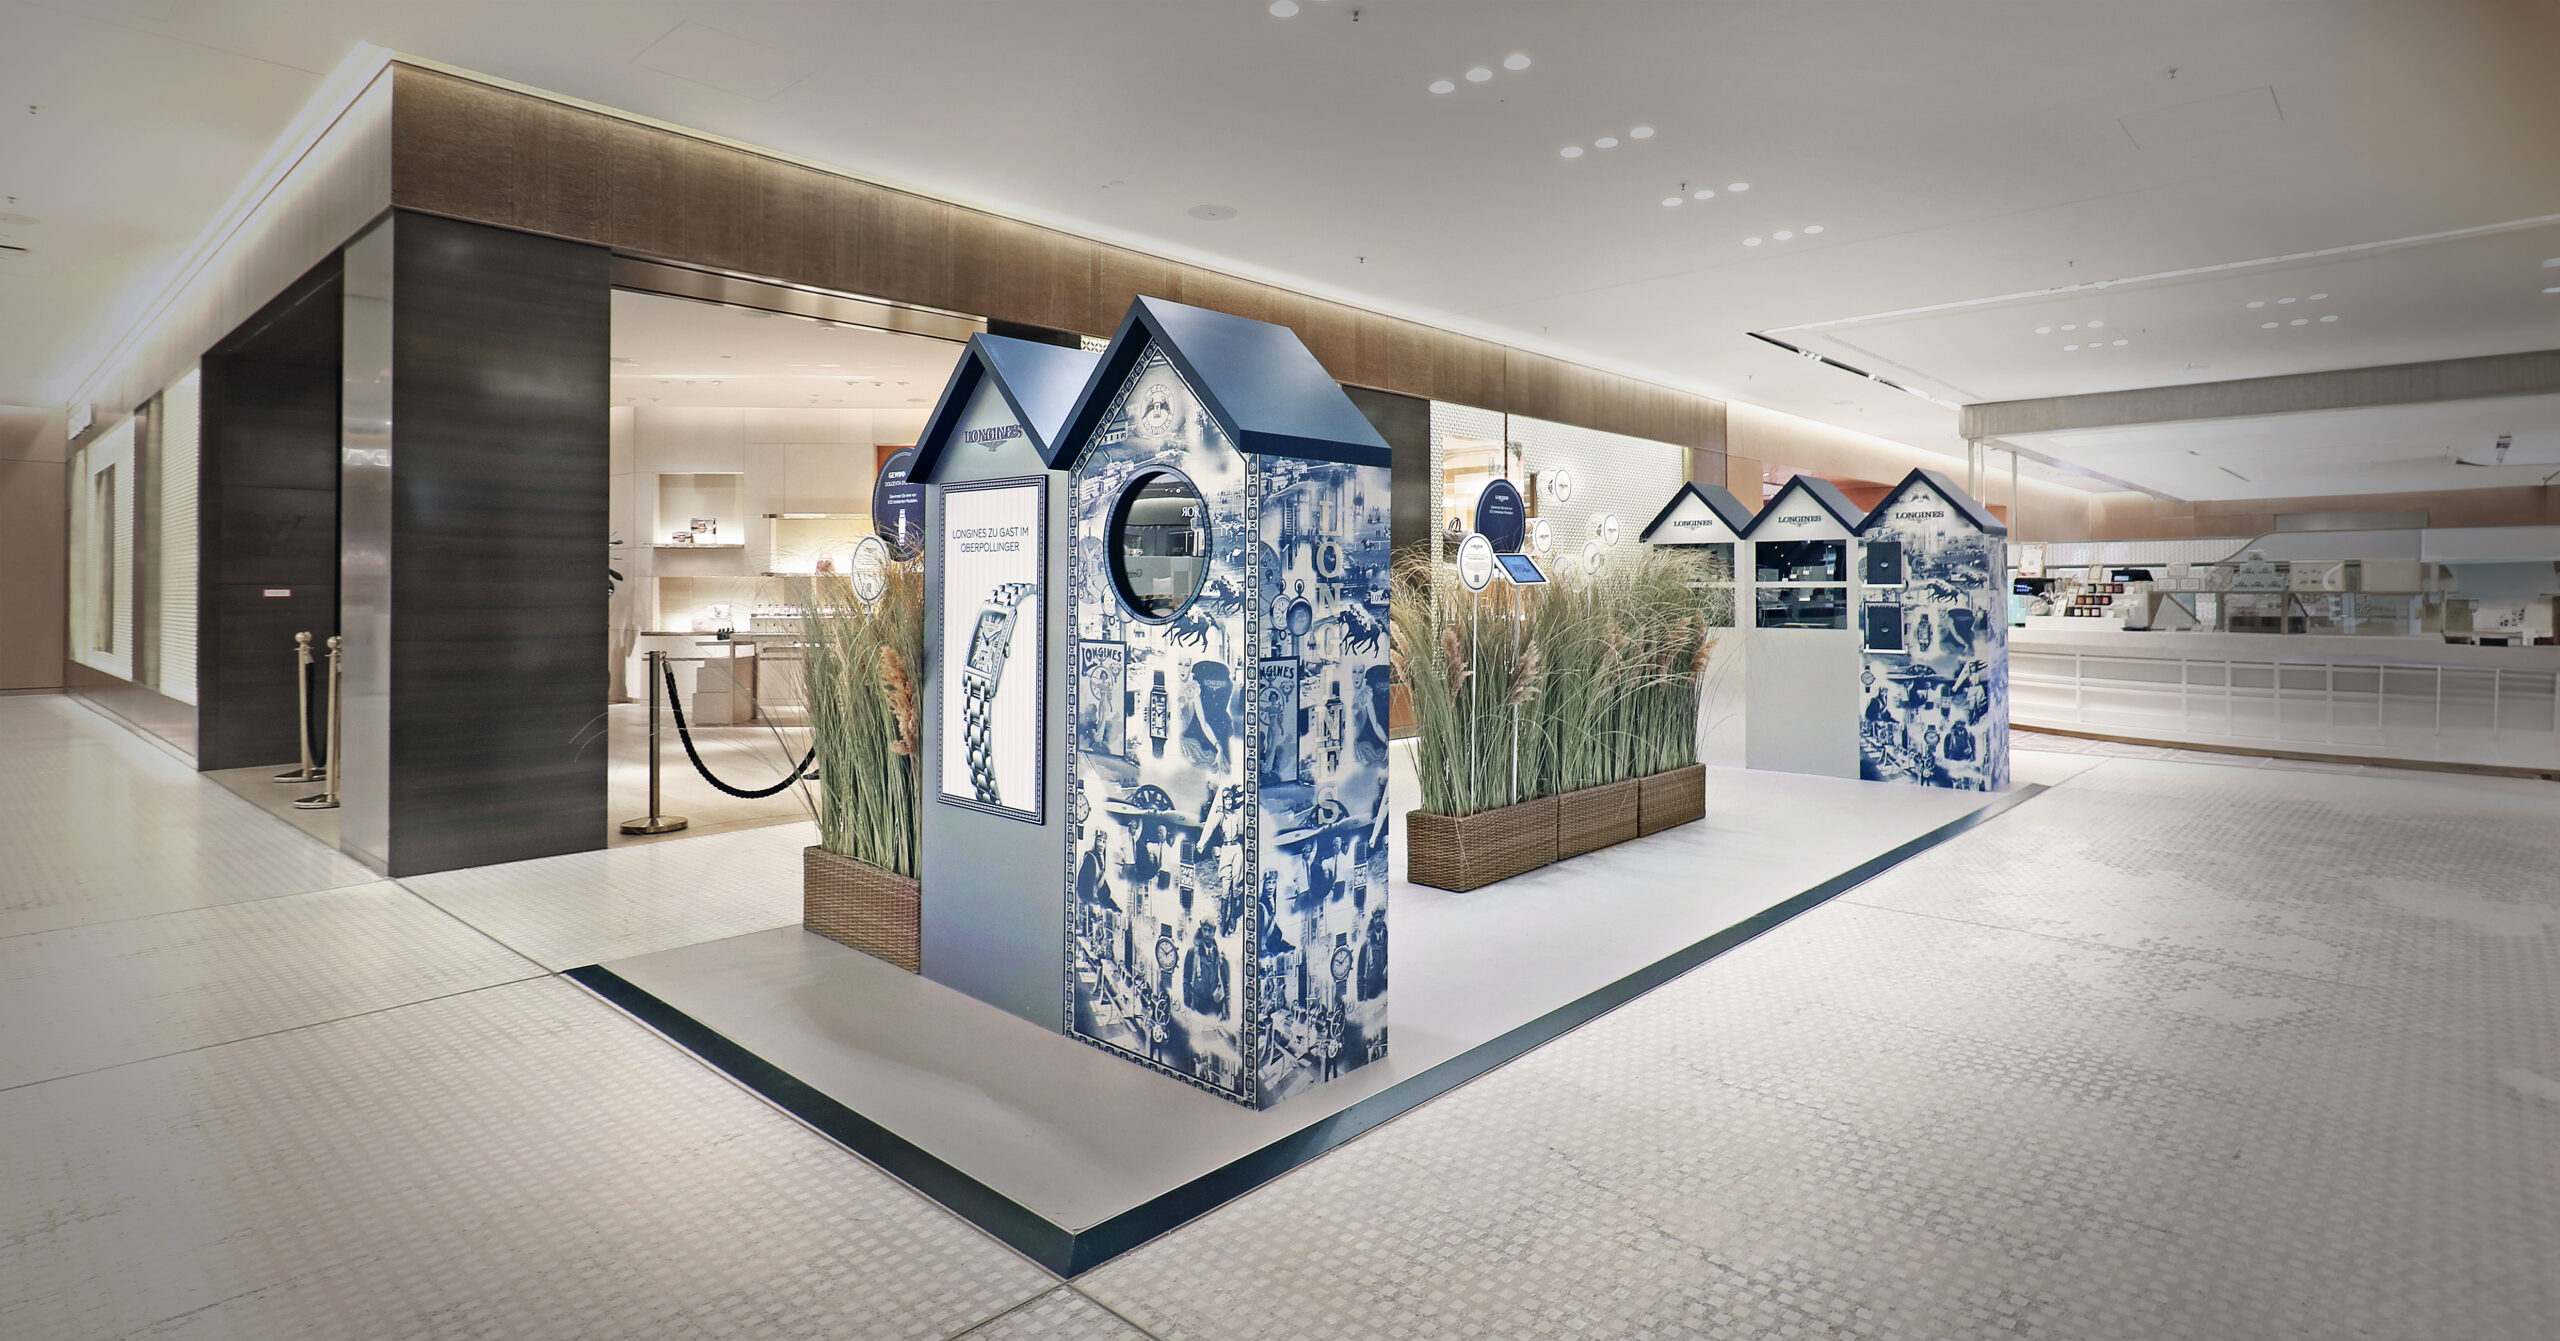 DFROST,LONGINES,POPUP, DolceVita, Brand Space, PopUp Space, Retail Architecture